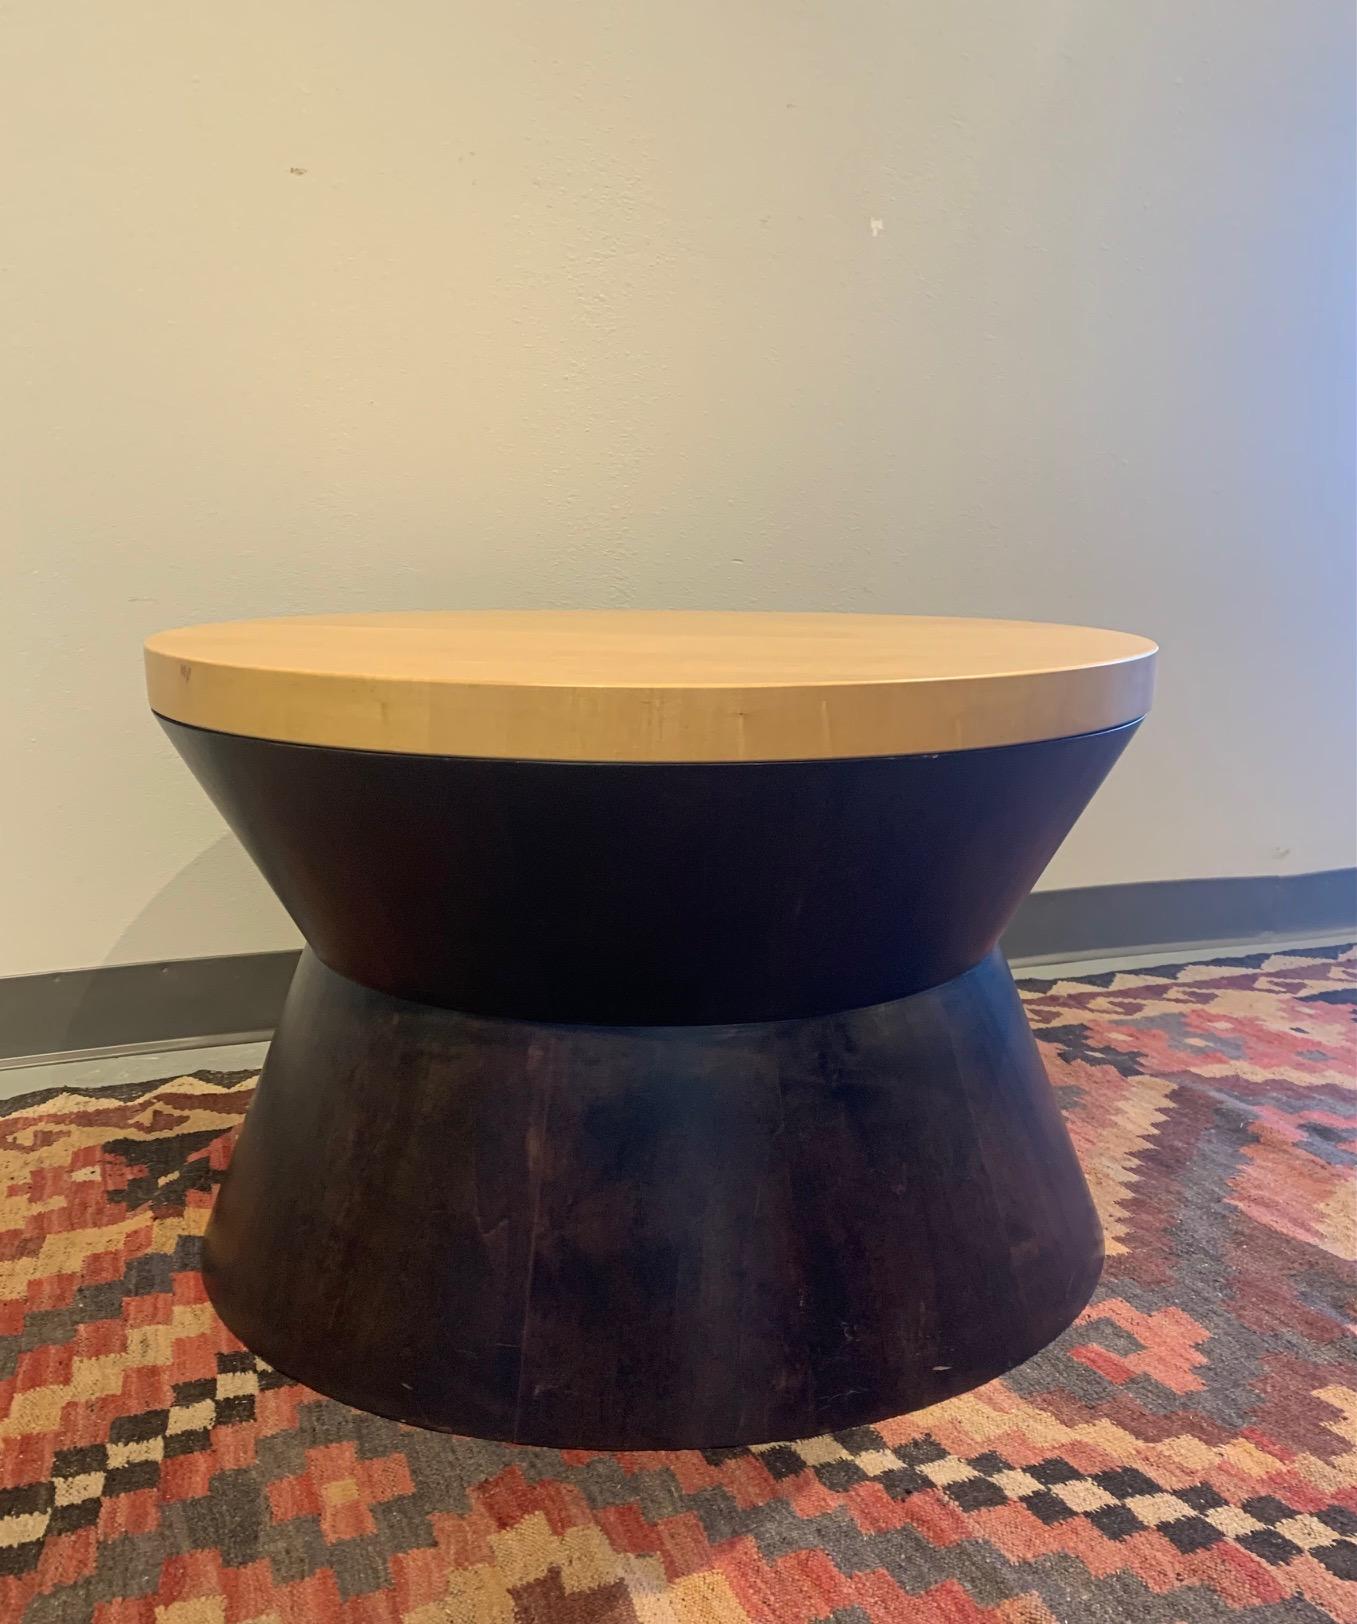 This handcrafted Contemporary Round Coffee Table has a mixed wood design with an Alder base and Maple top.